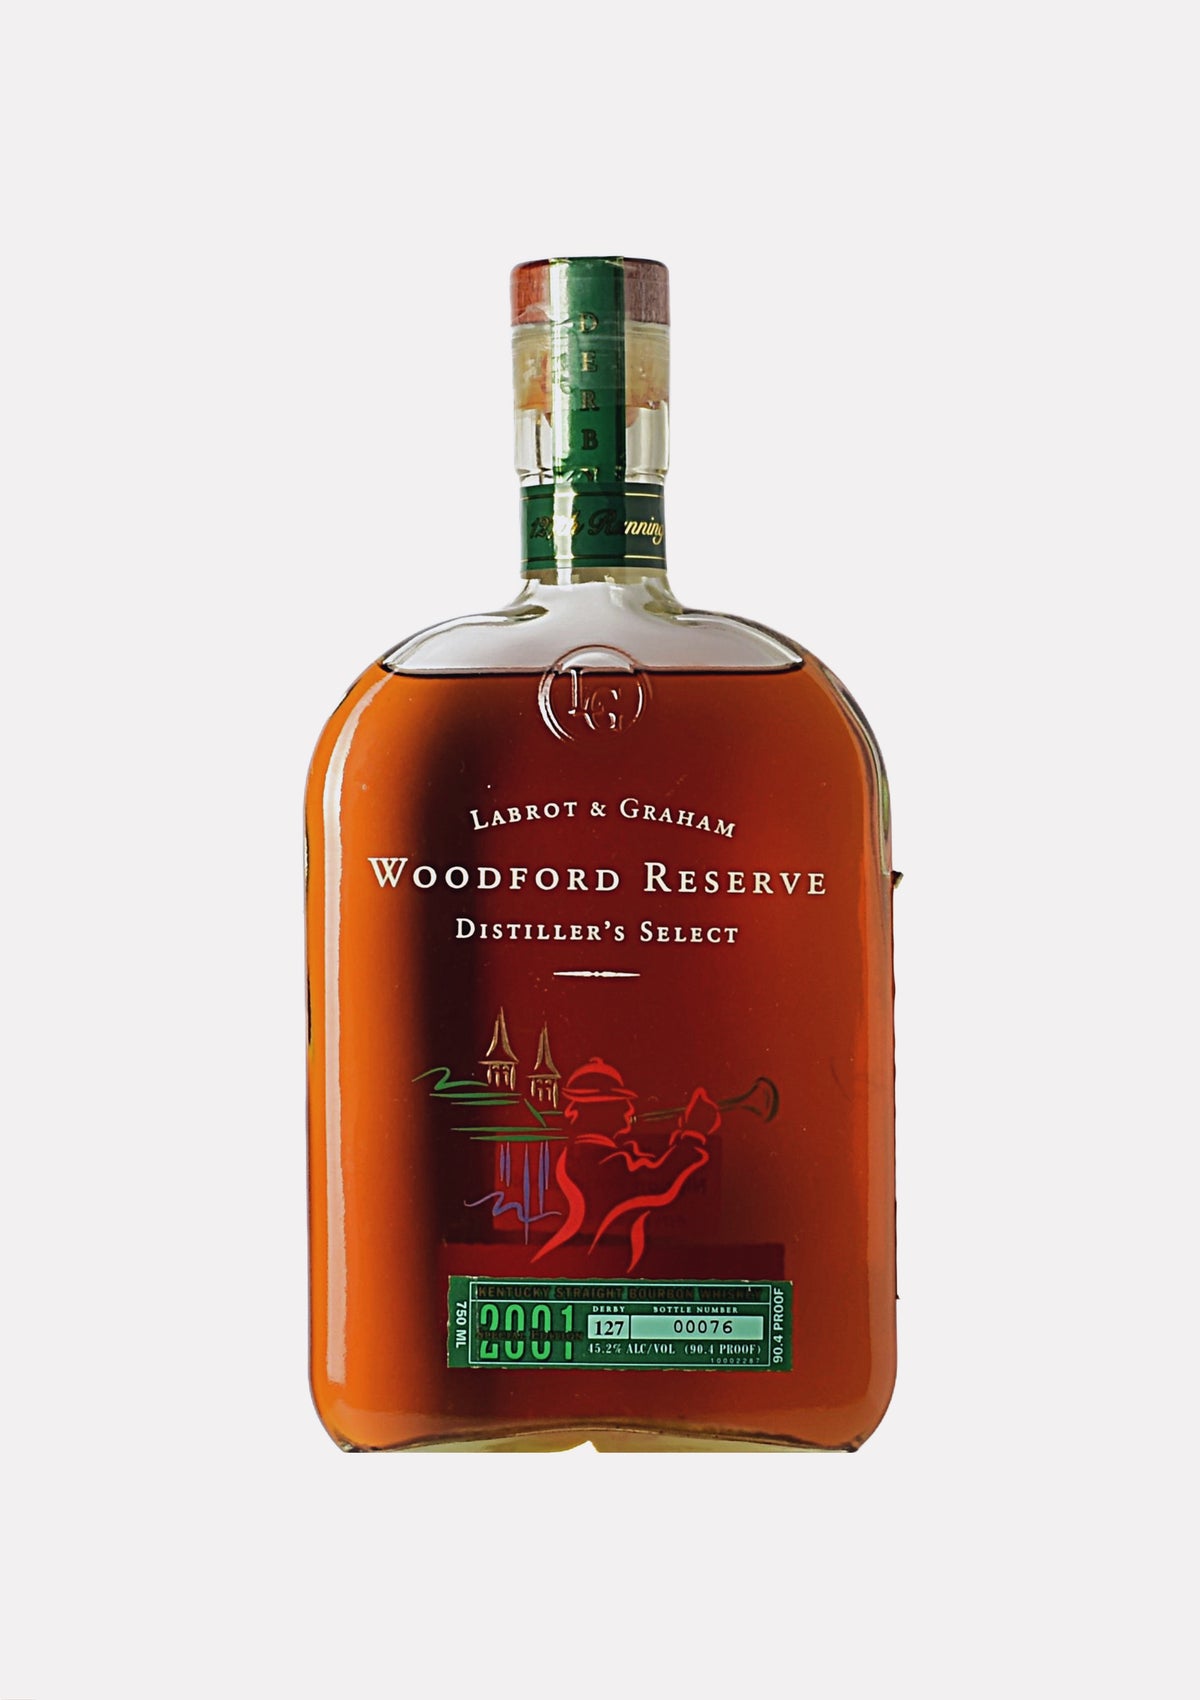 Woodford Reserve Kentucky Derby 127 2001